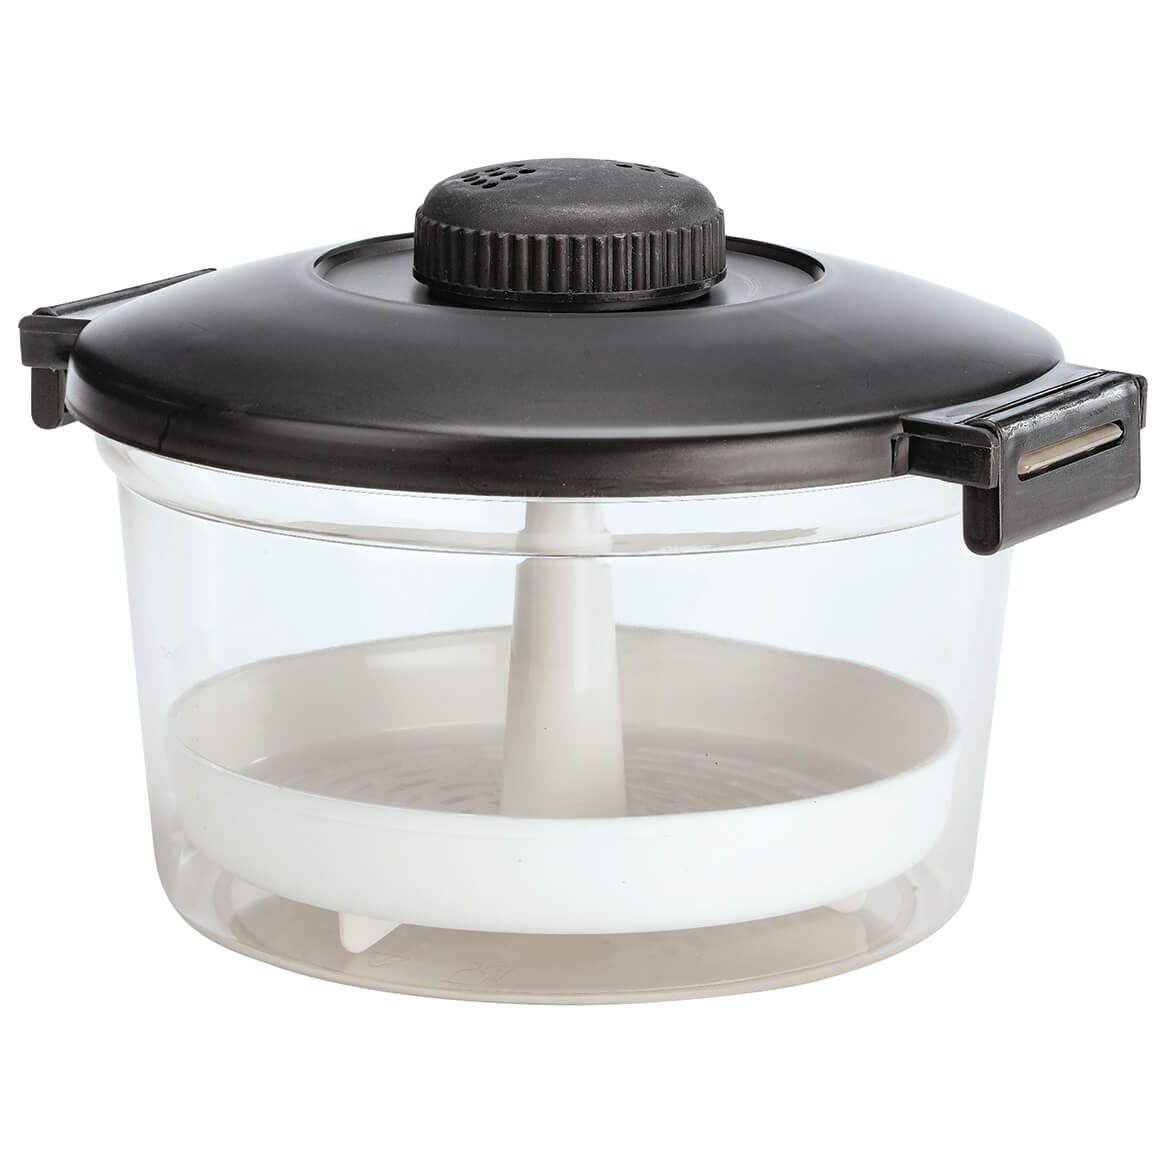 Microwave Pressure Cooker with Steamer + '-' + 375294